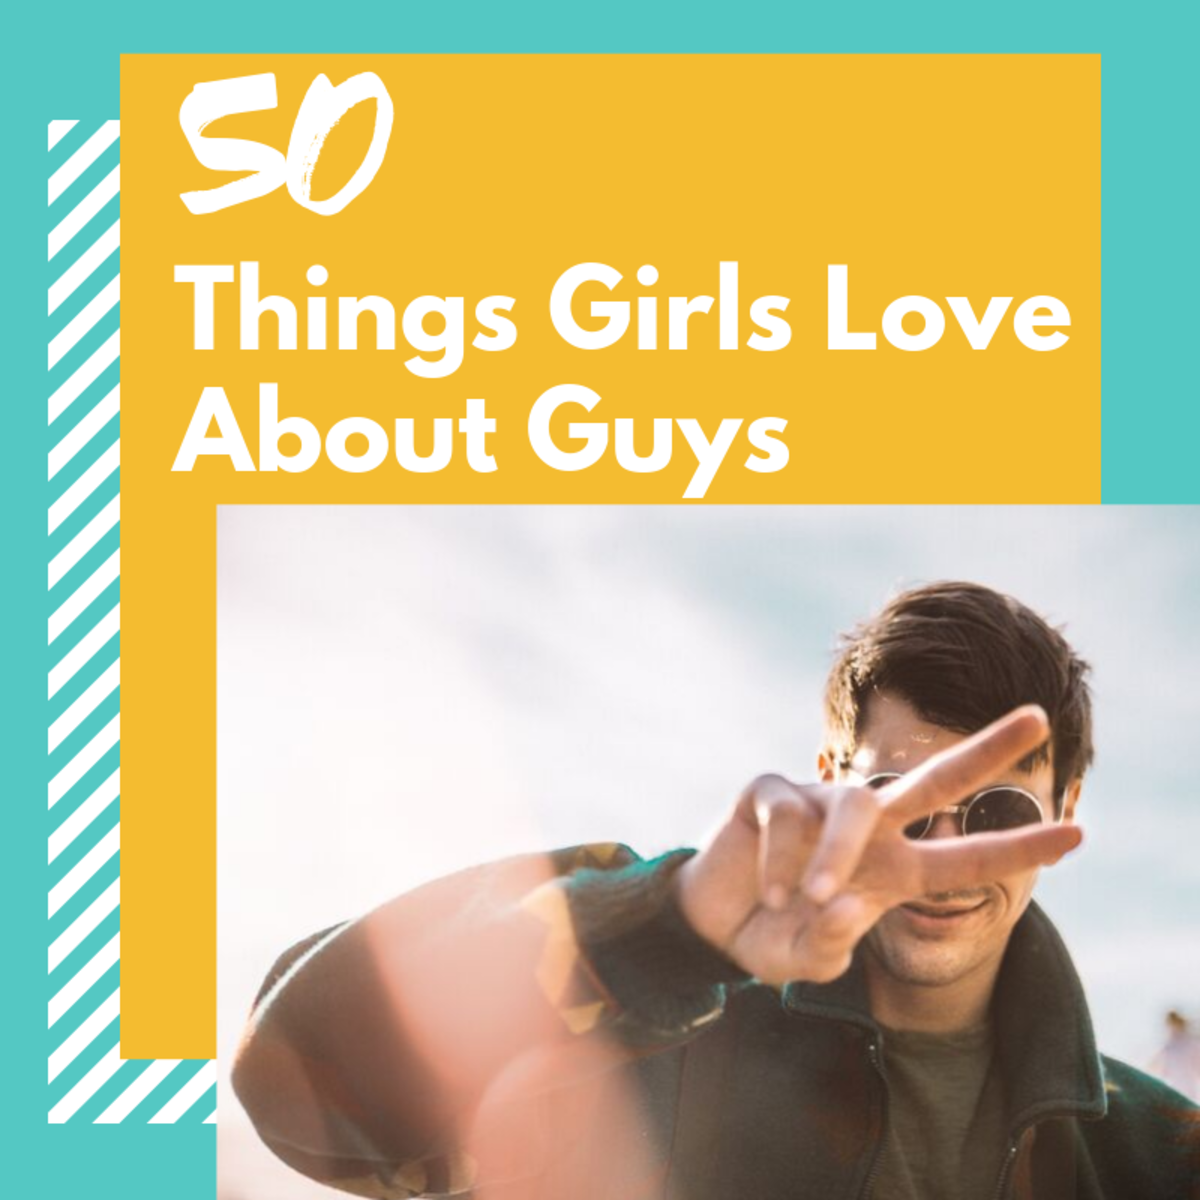 50 Things Girls Like About Guys